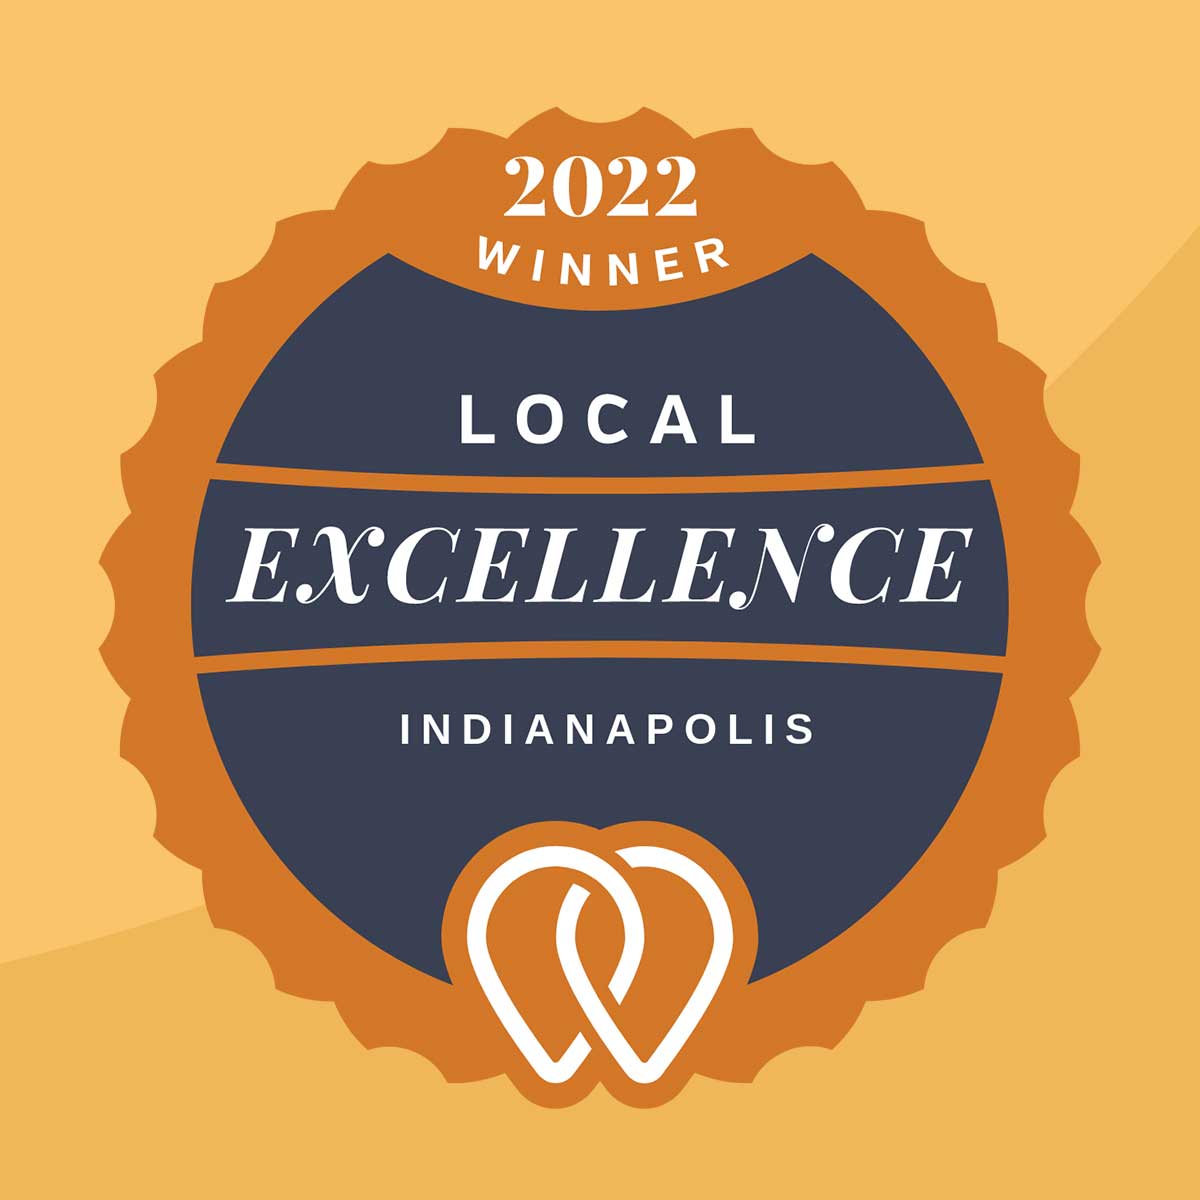 local excellence award Indianapolis 2021 graphic